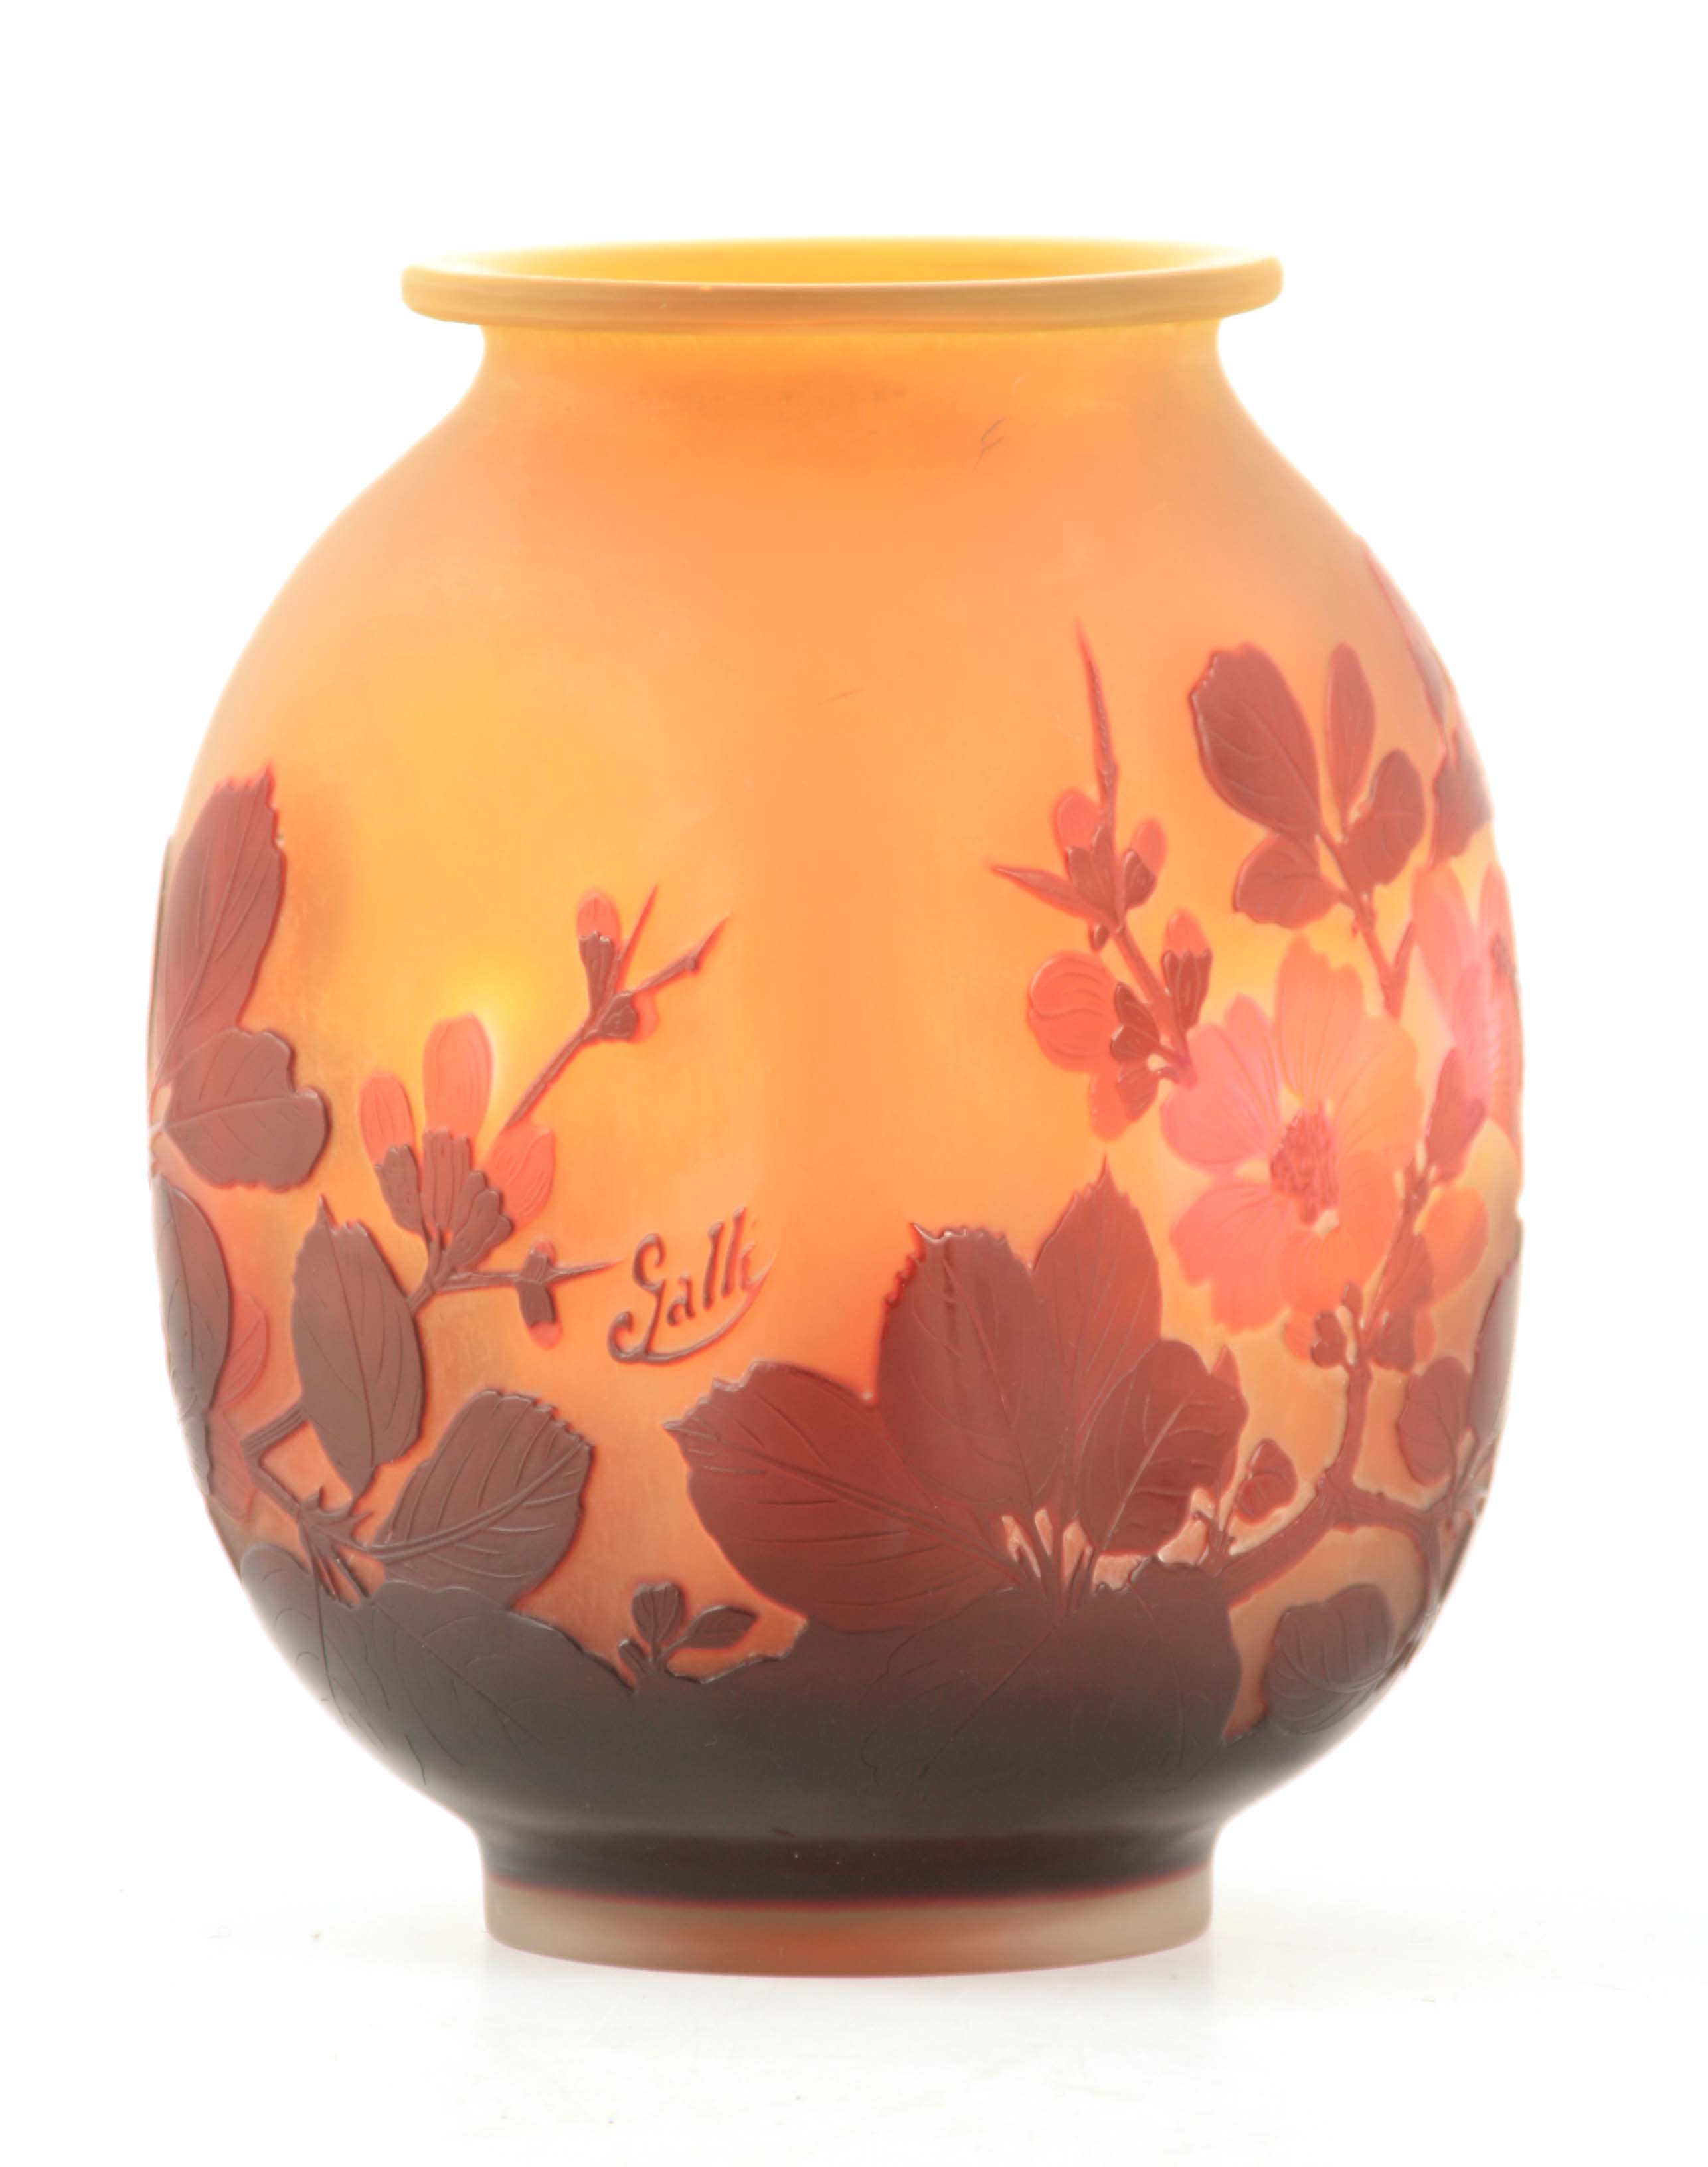 GALLE. AN EARLY 20TH CENTURY GLASS CAMEO VASE of square shape with floral overlay and raised